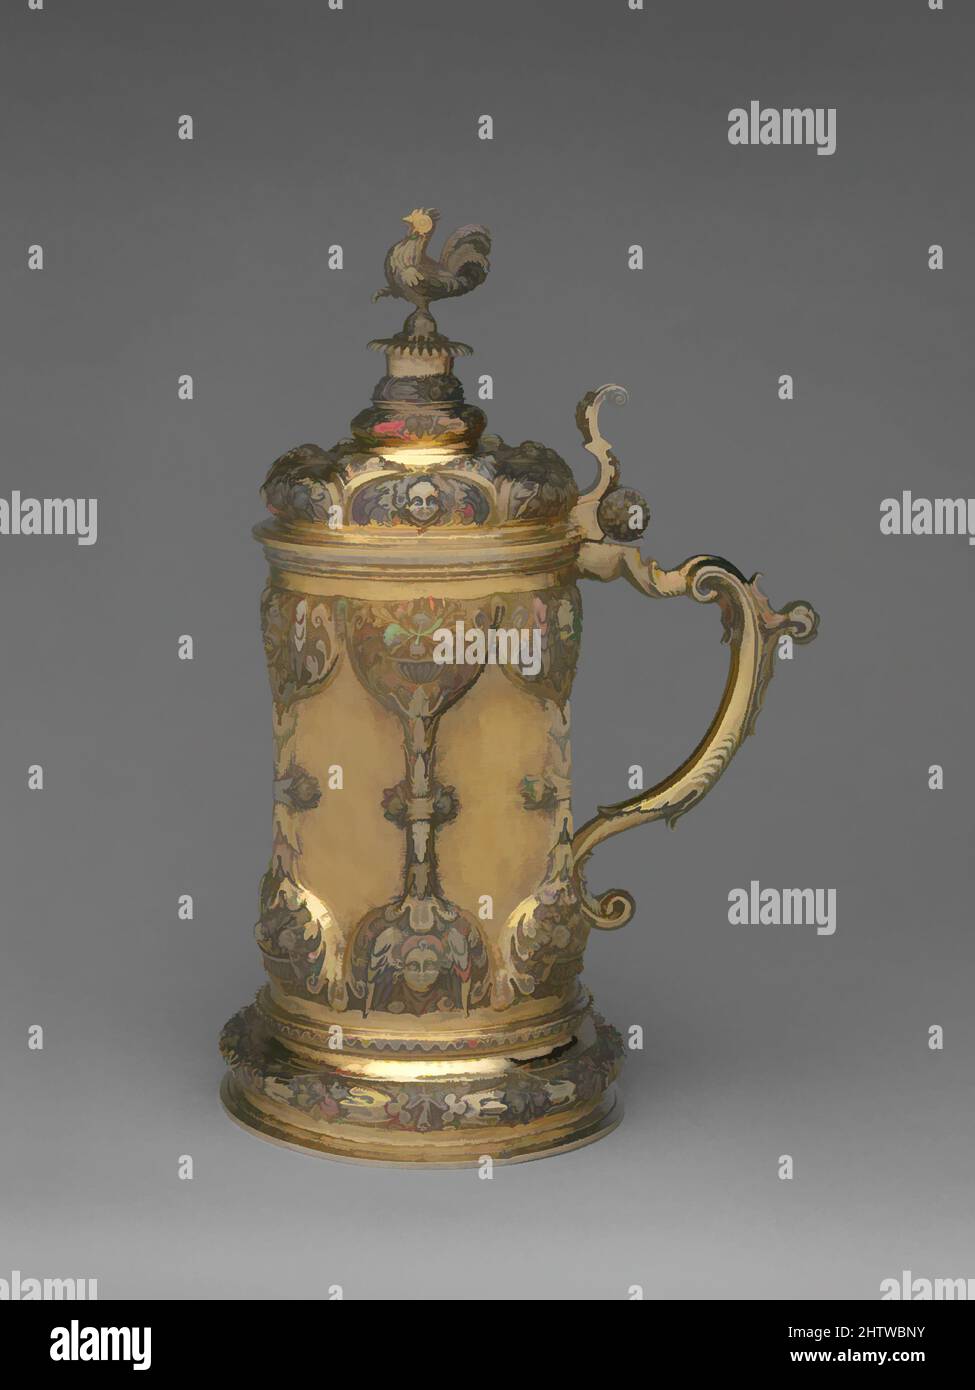 Art inspired by Tankard, late 17th century, Hungarian, Brassó, Gilded silver, Overall: 11 3/4 x 5 1/4 in. (29.8 x 13.3 cm), Metalwork-Silver, It is unclear if this tankard was made for private use or if it was always intended to serve as a communion vessel, which was its function after, Classic works modernized by Artotop with a splash of modernity. Shapes, color and value, eye-catching visual impact on art. Emotions through freedom of artworks in a contemporary way. A timeless message pursuing a wildly creative new direction. Artists turning to the digital medium and creating the Artotop NFT Stock Photo